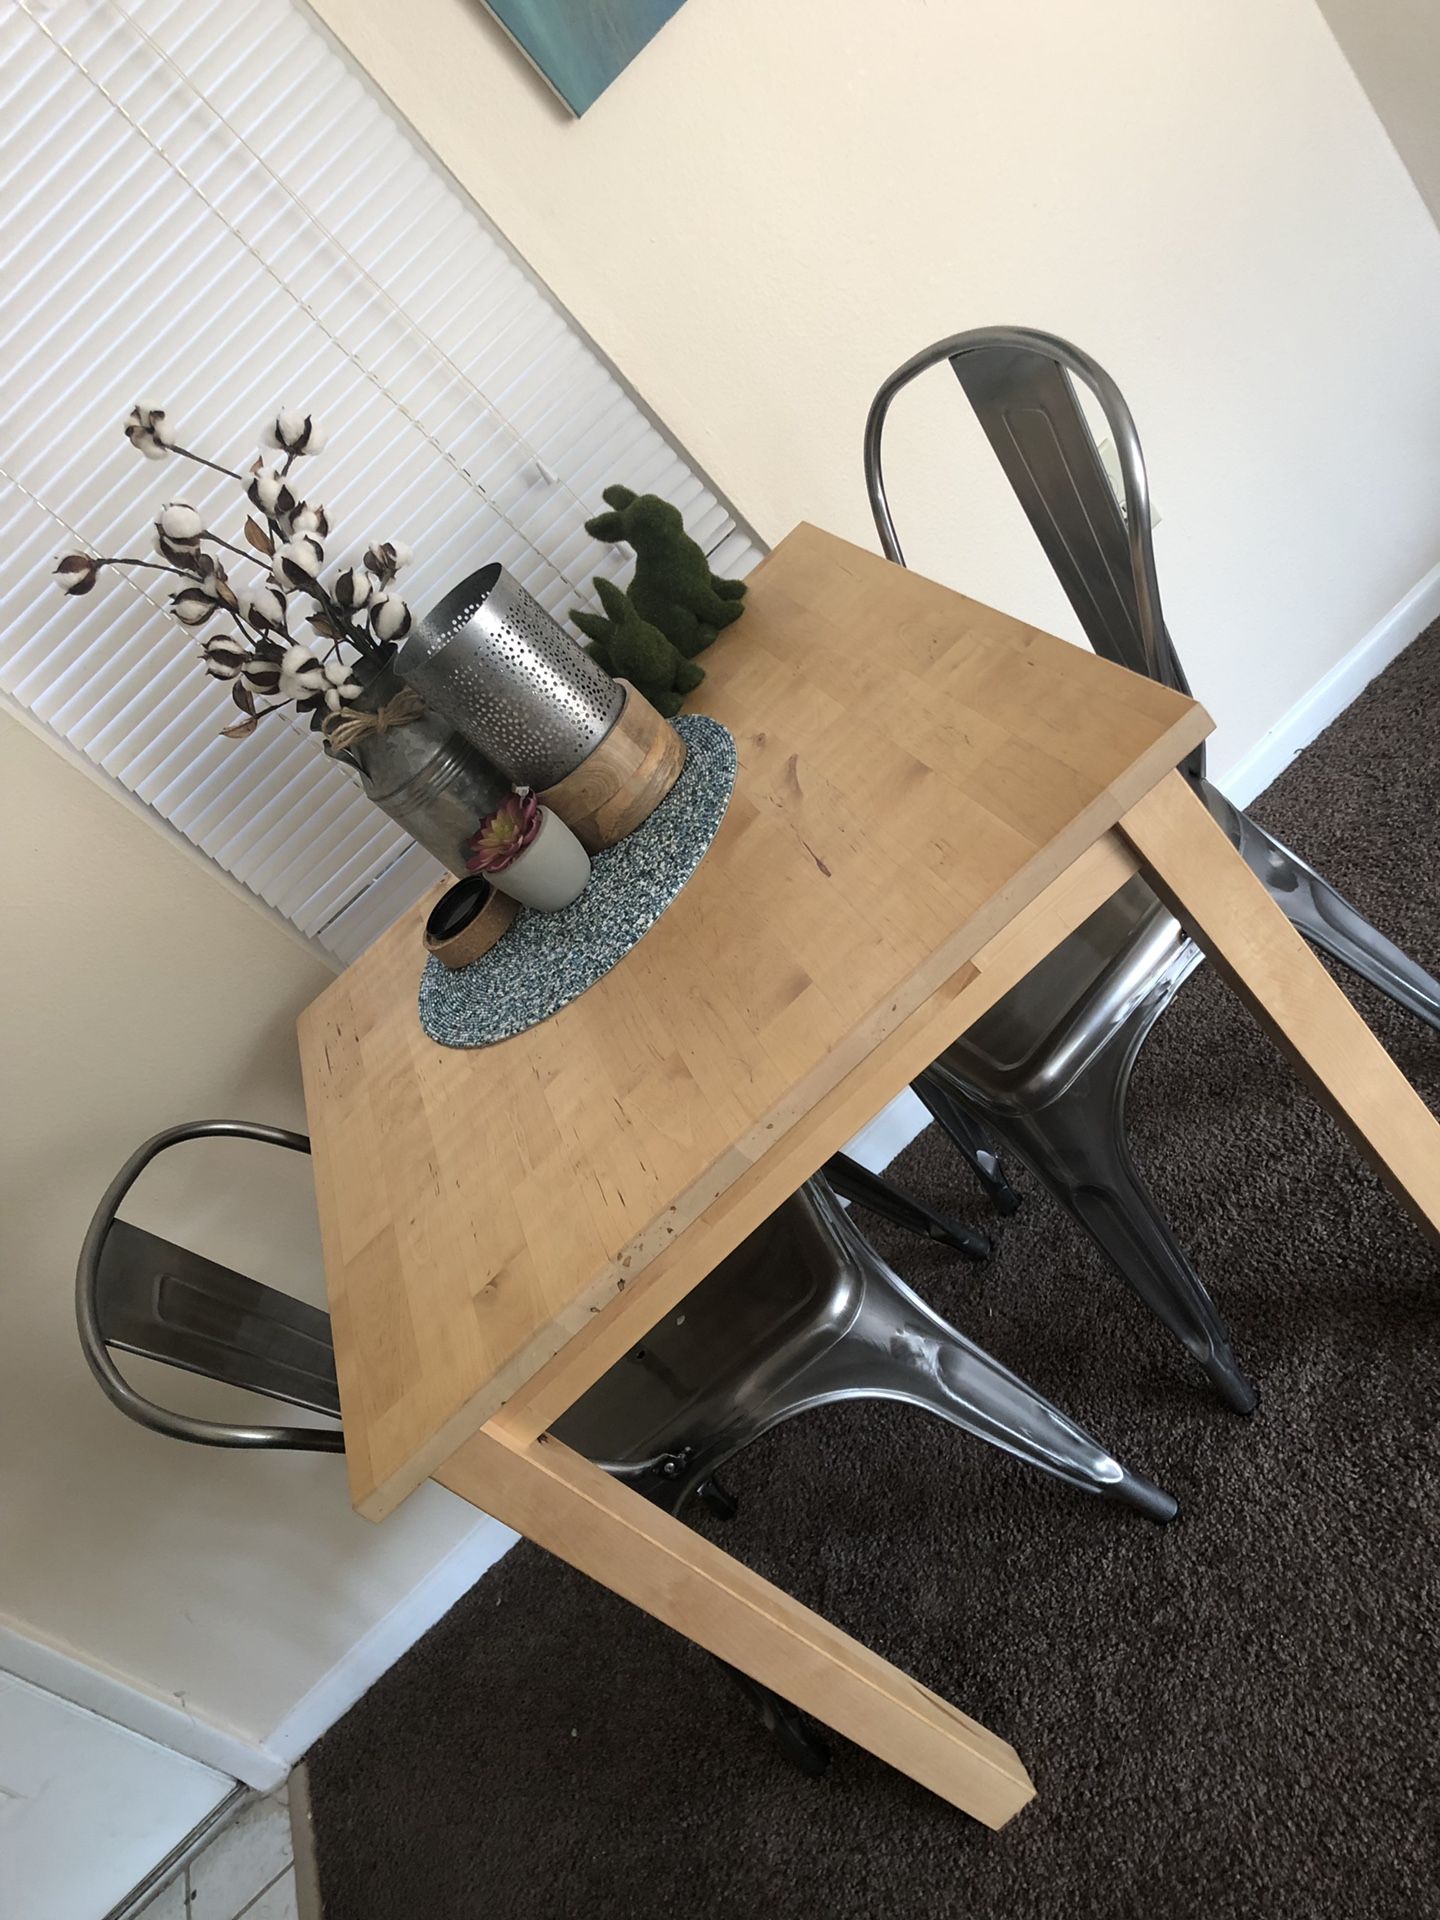 rare used. Wood table with metal chairs brand new